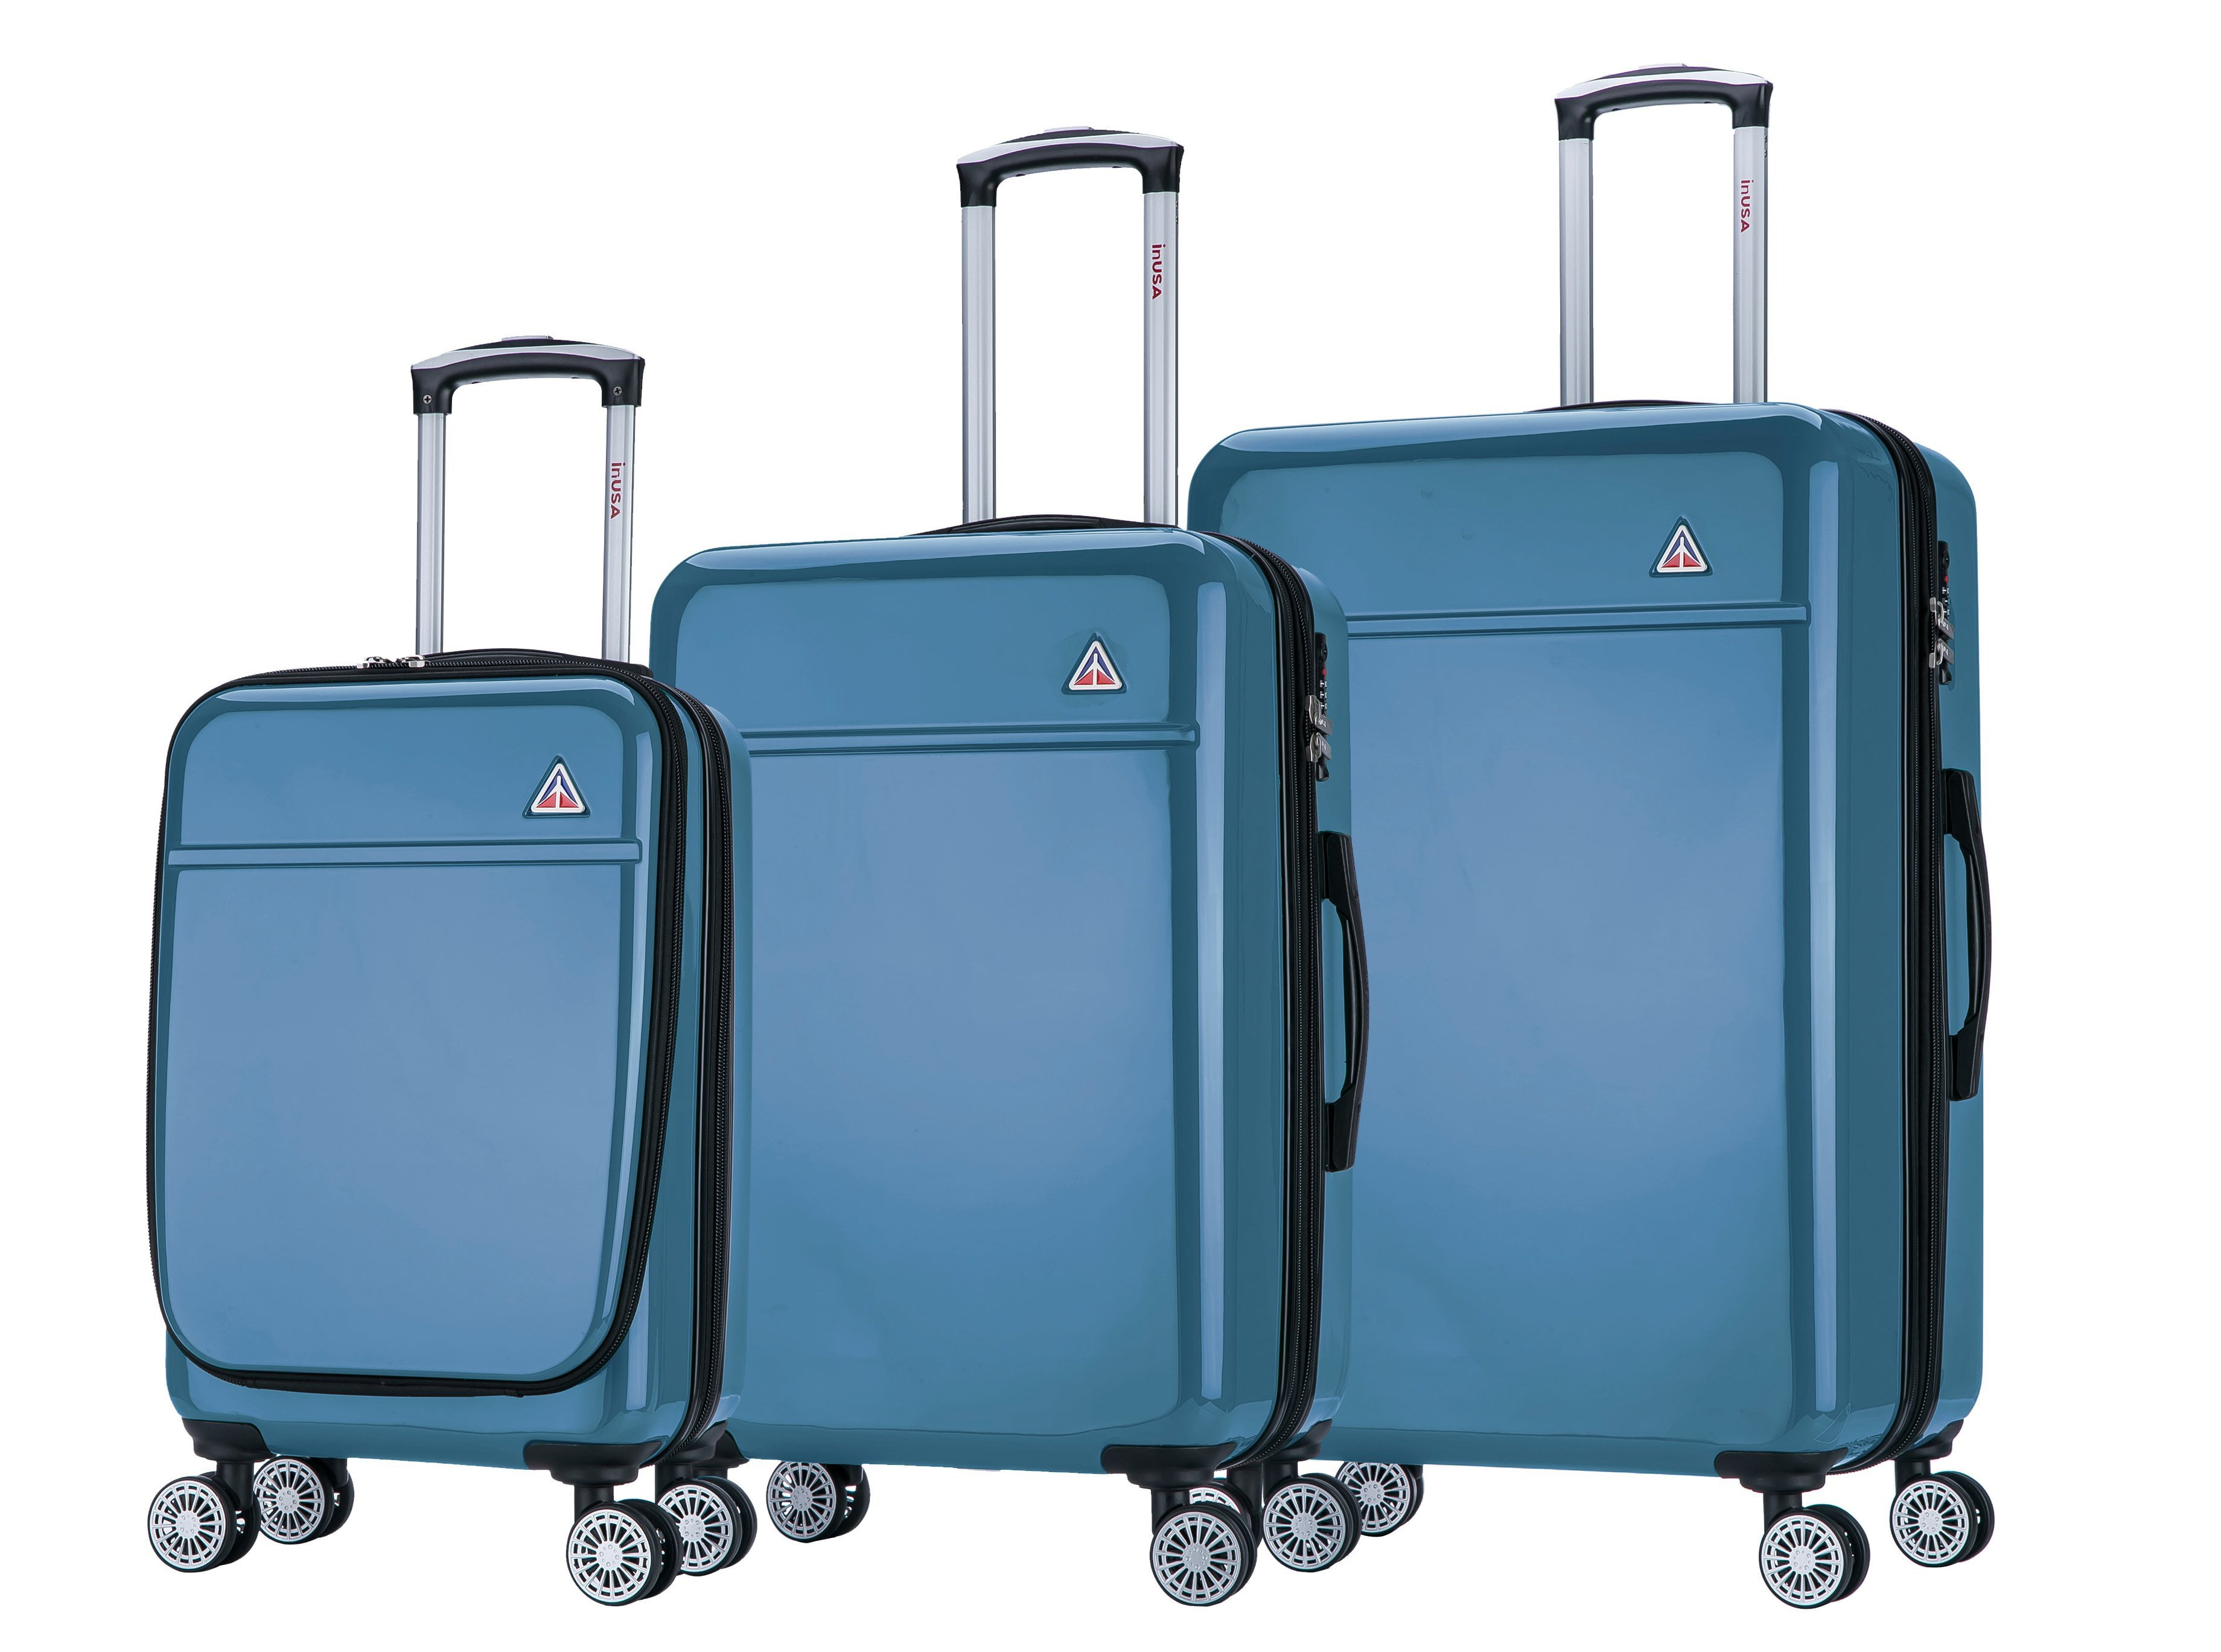 AWAY Travel The LARGE Suitcase Luggage Spinner Navy New NIB